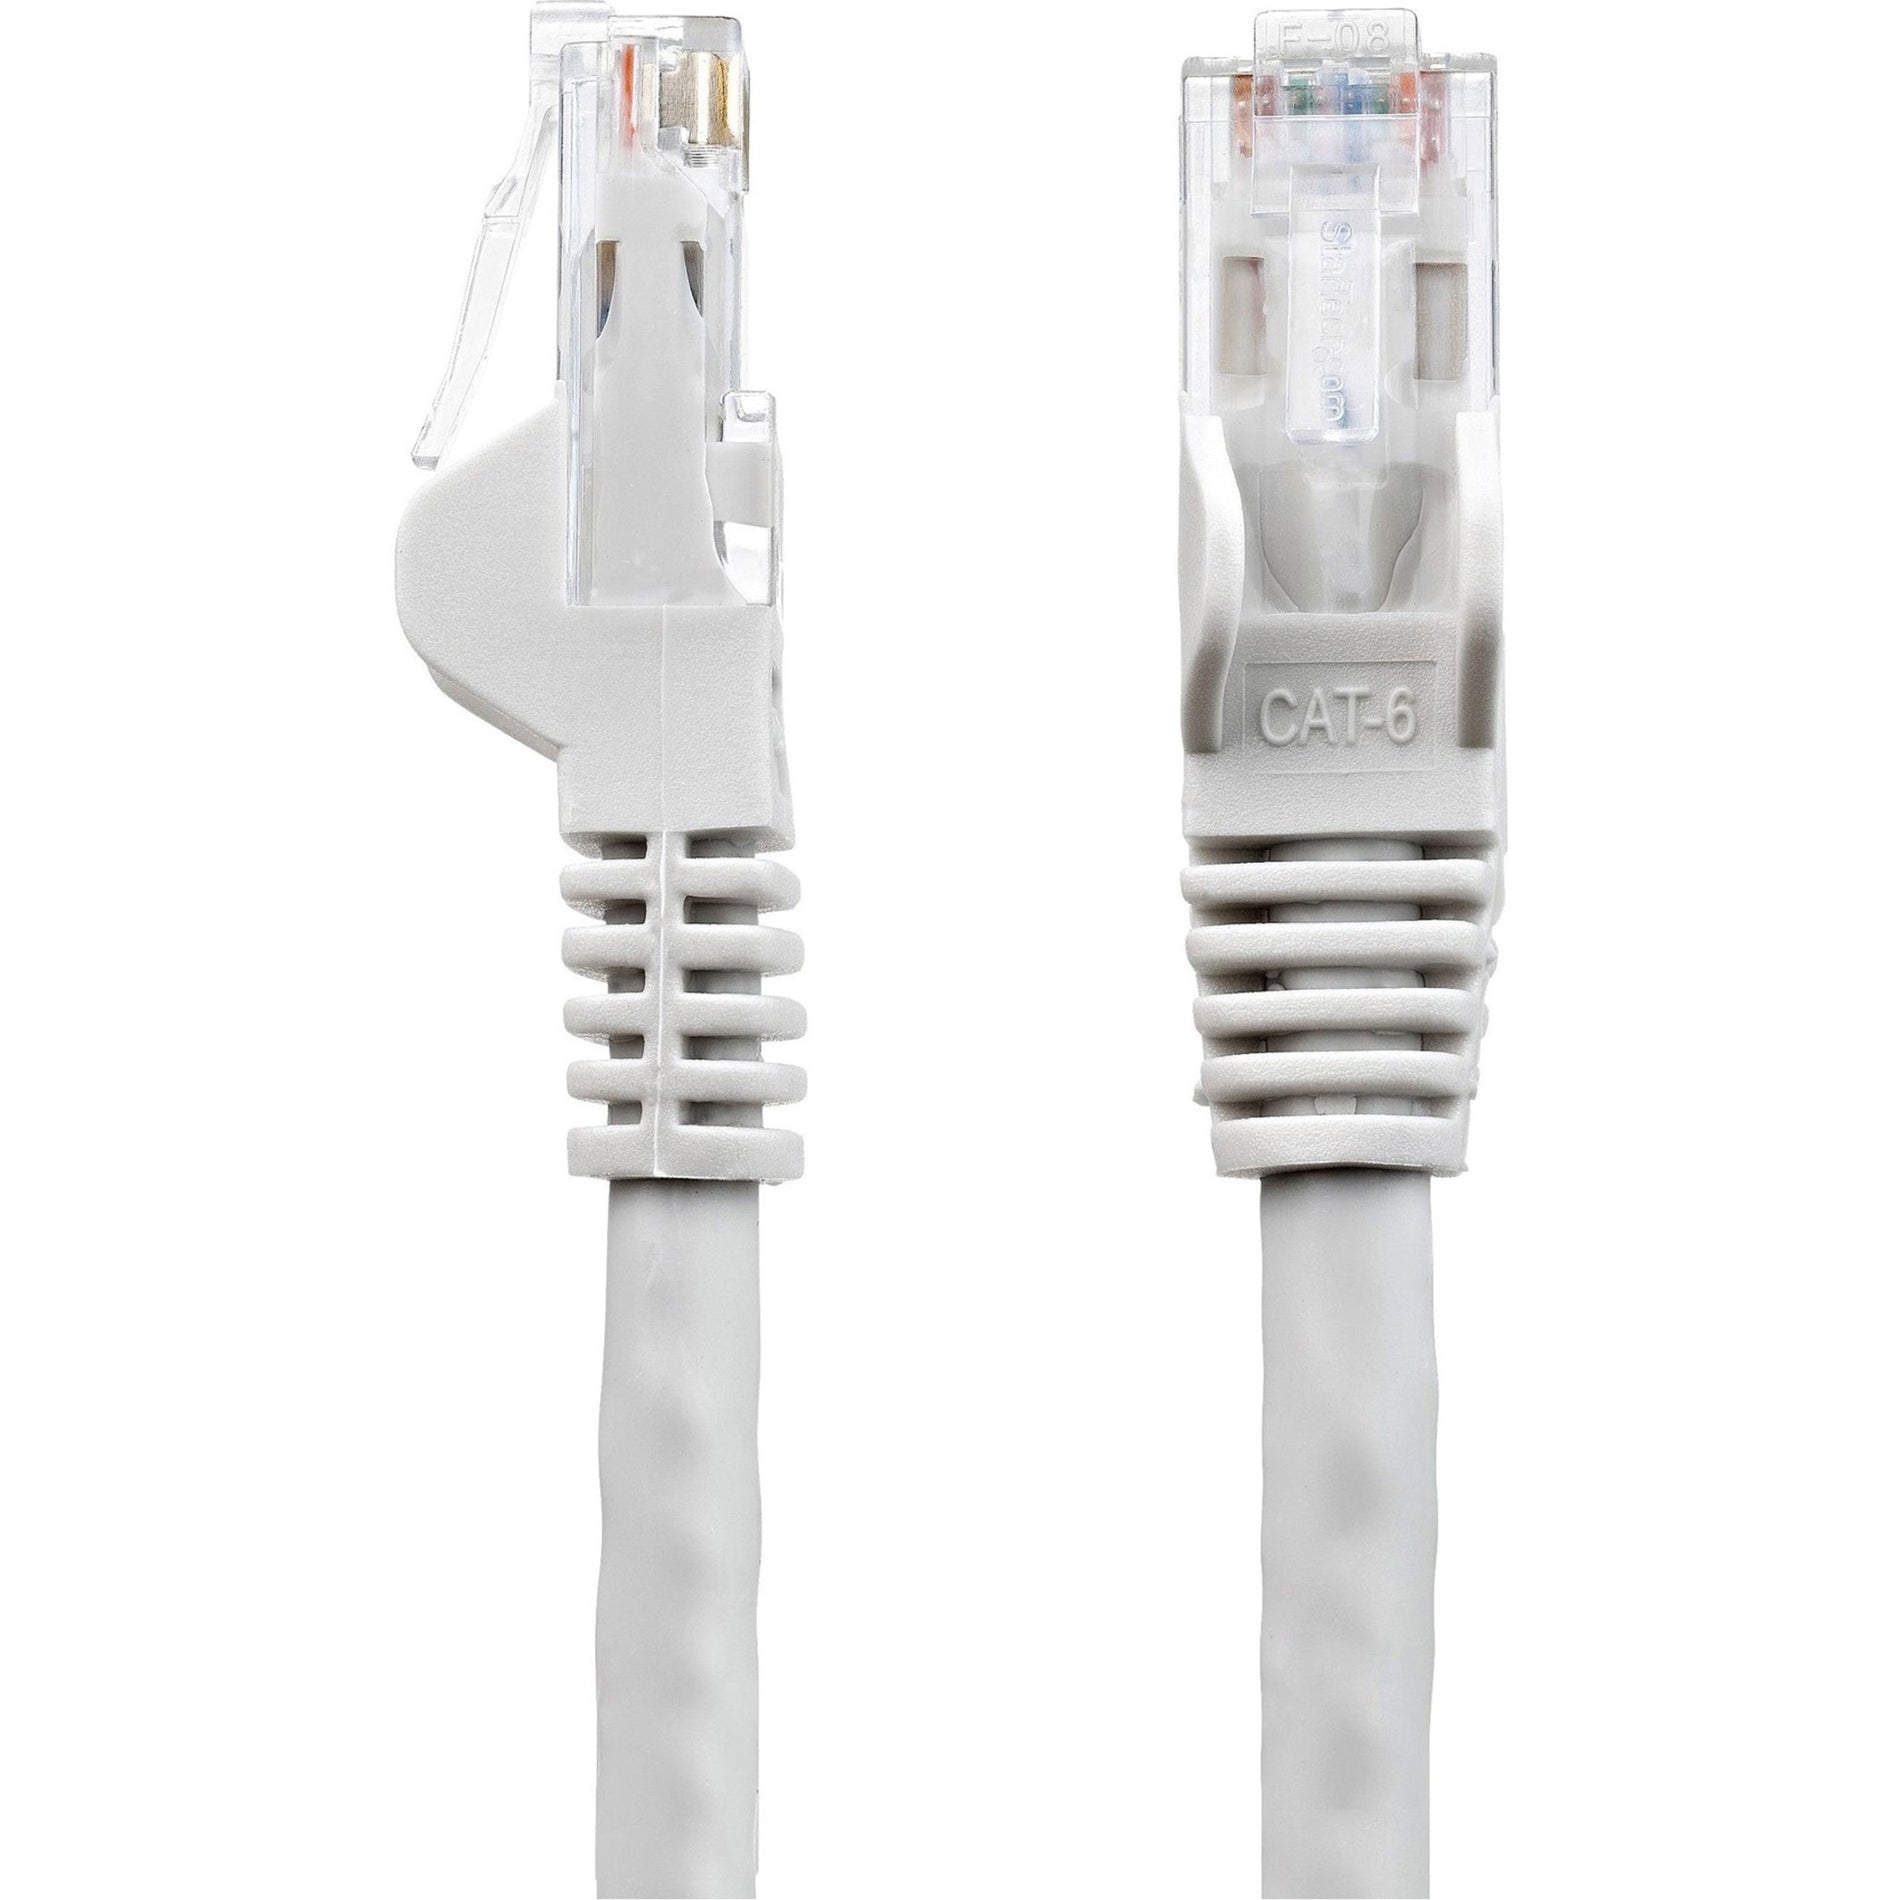 StarTech.com N6PATCH35GR 35 ft Gray Snagless Cat6 UTP Patch Cable, Lifetime Warranty, 10 Gbit/s Data Transfer Rate, Corrosion Resistant